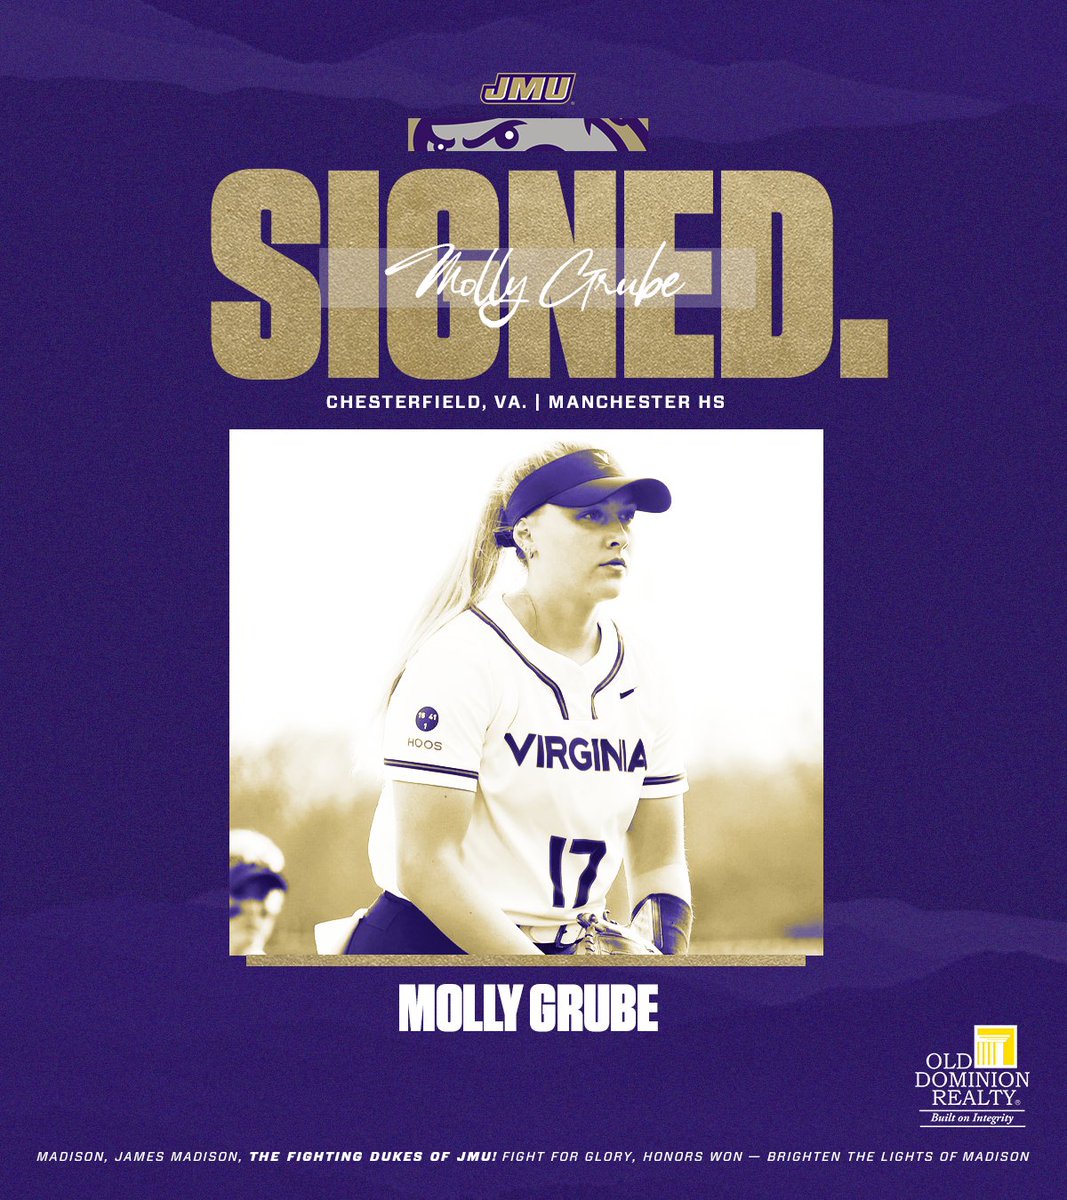 ✍️ 𝗦𝗜𝗚𝗡𝗘𝗗 The Dukes are excited to welcome Molly Grube to the family! ✅ Four-year starter ✅ Career 3.57 ERA ✅ Home at JMU 📰 | bit.ly/3XK2AN0 #GoDukes